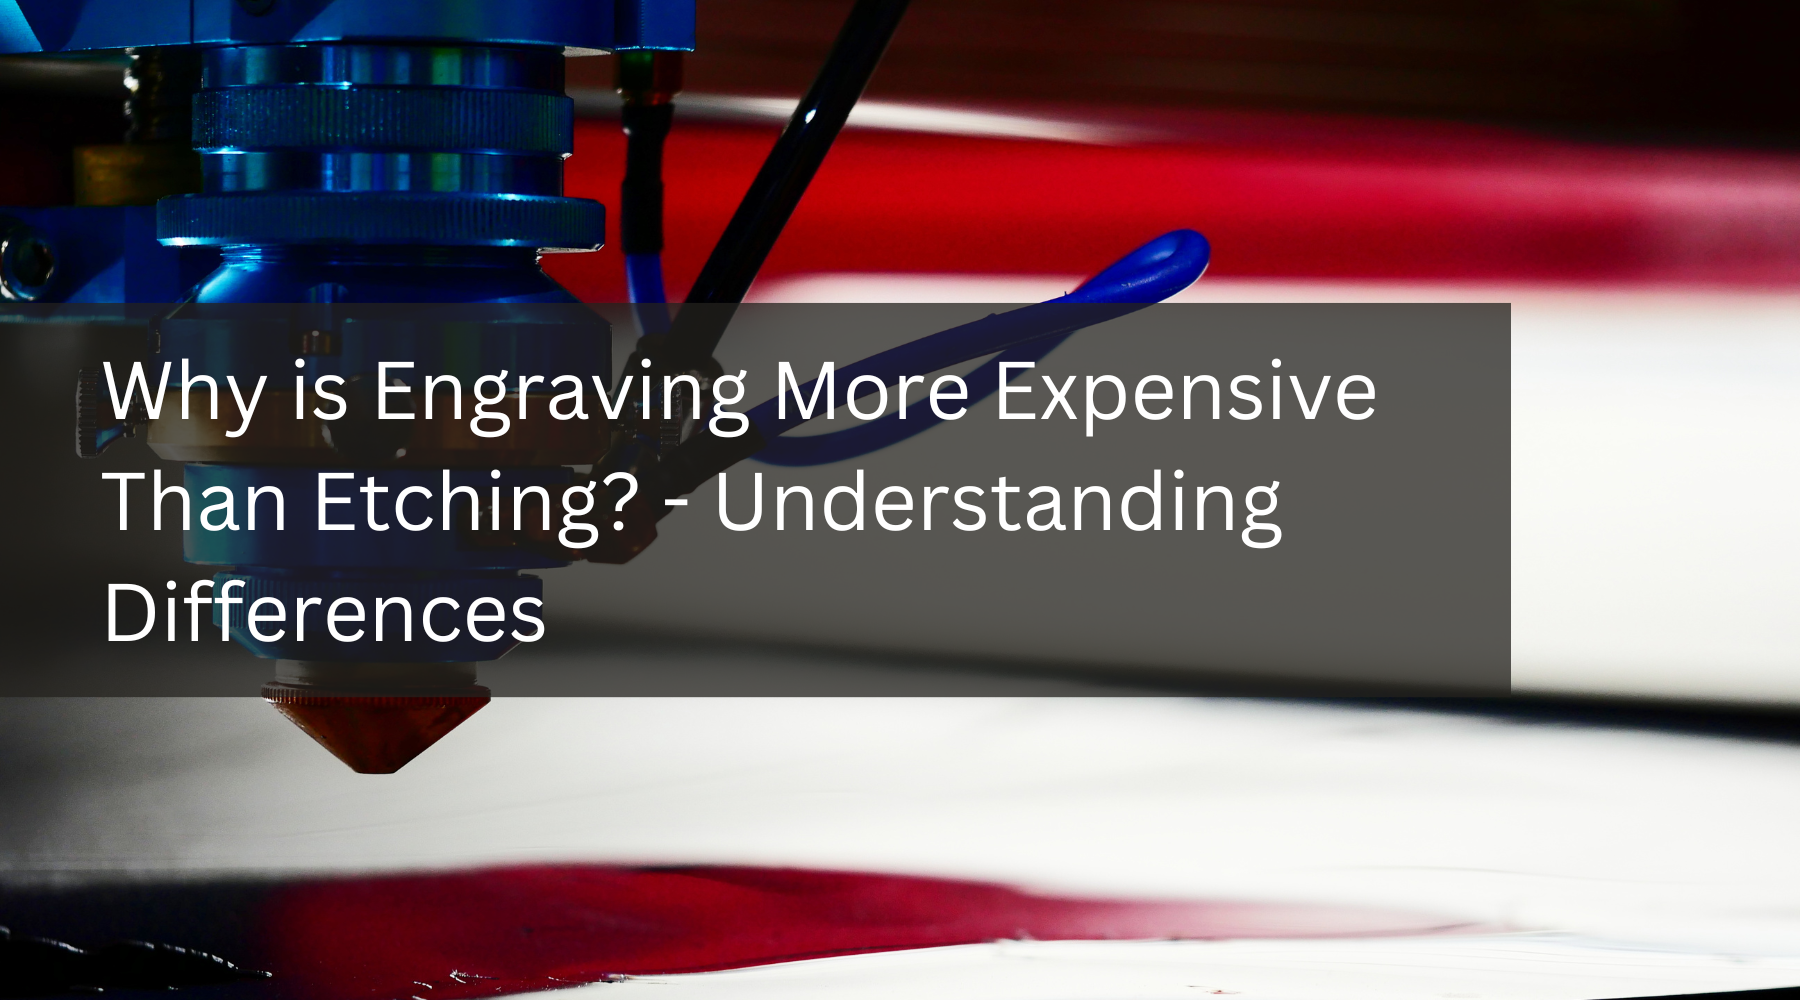 Why is Engraving More Expensive Than Etching? - Understanding Differences